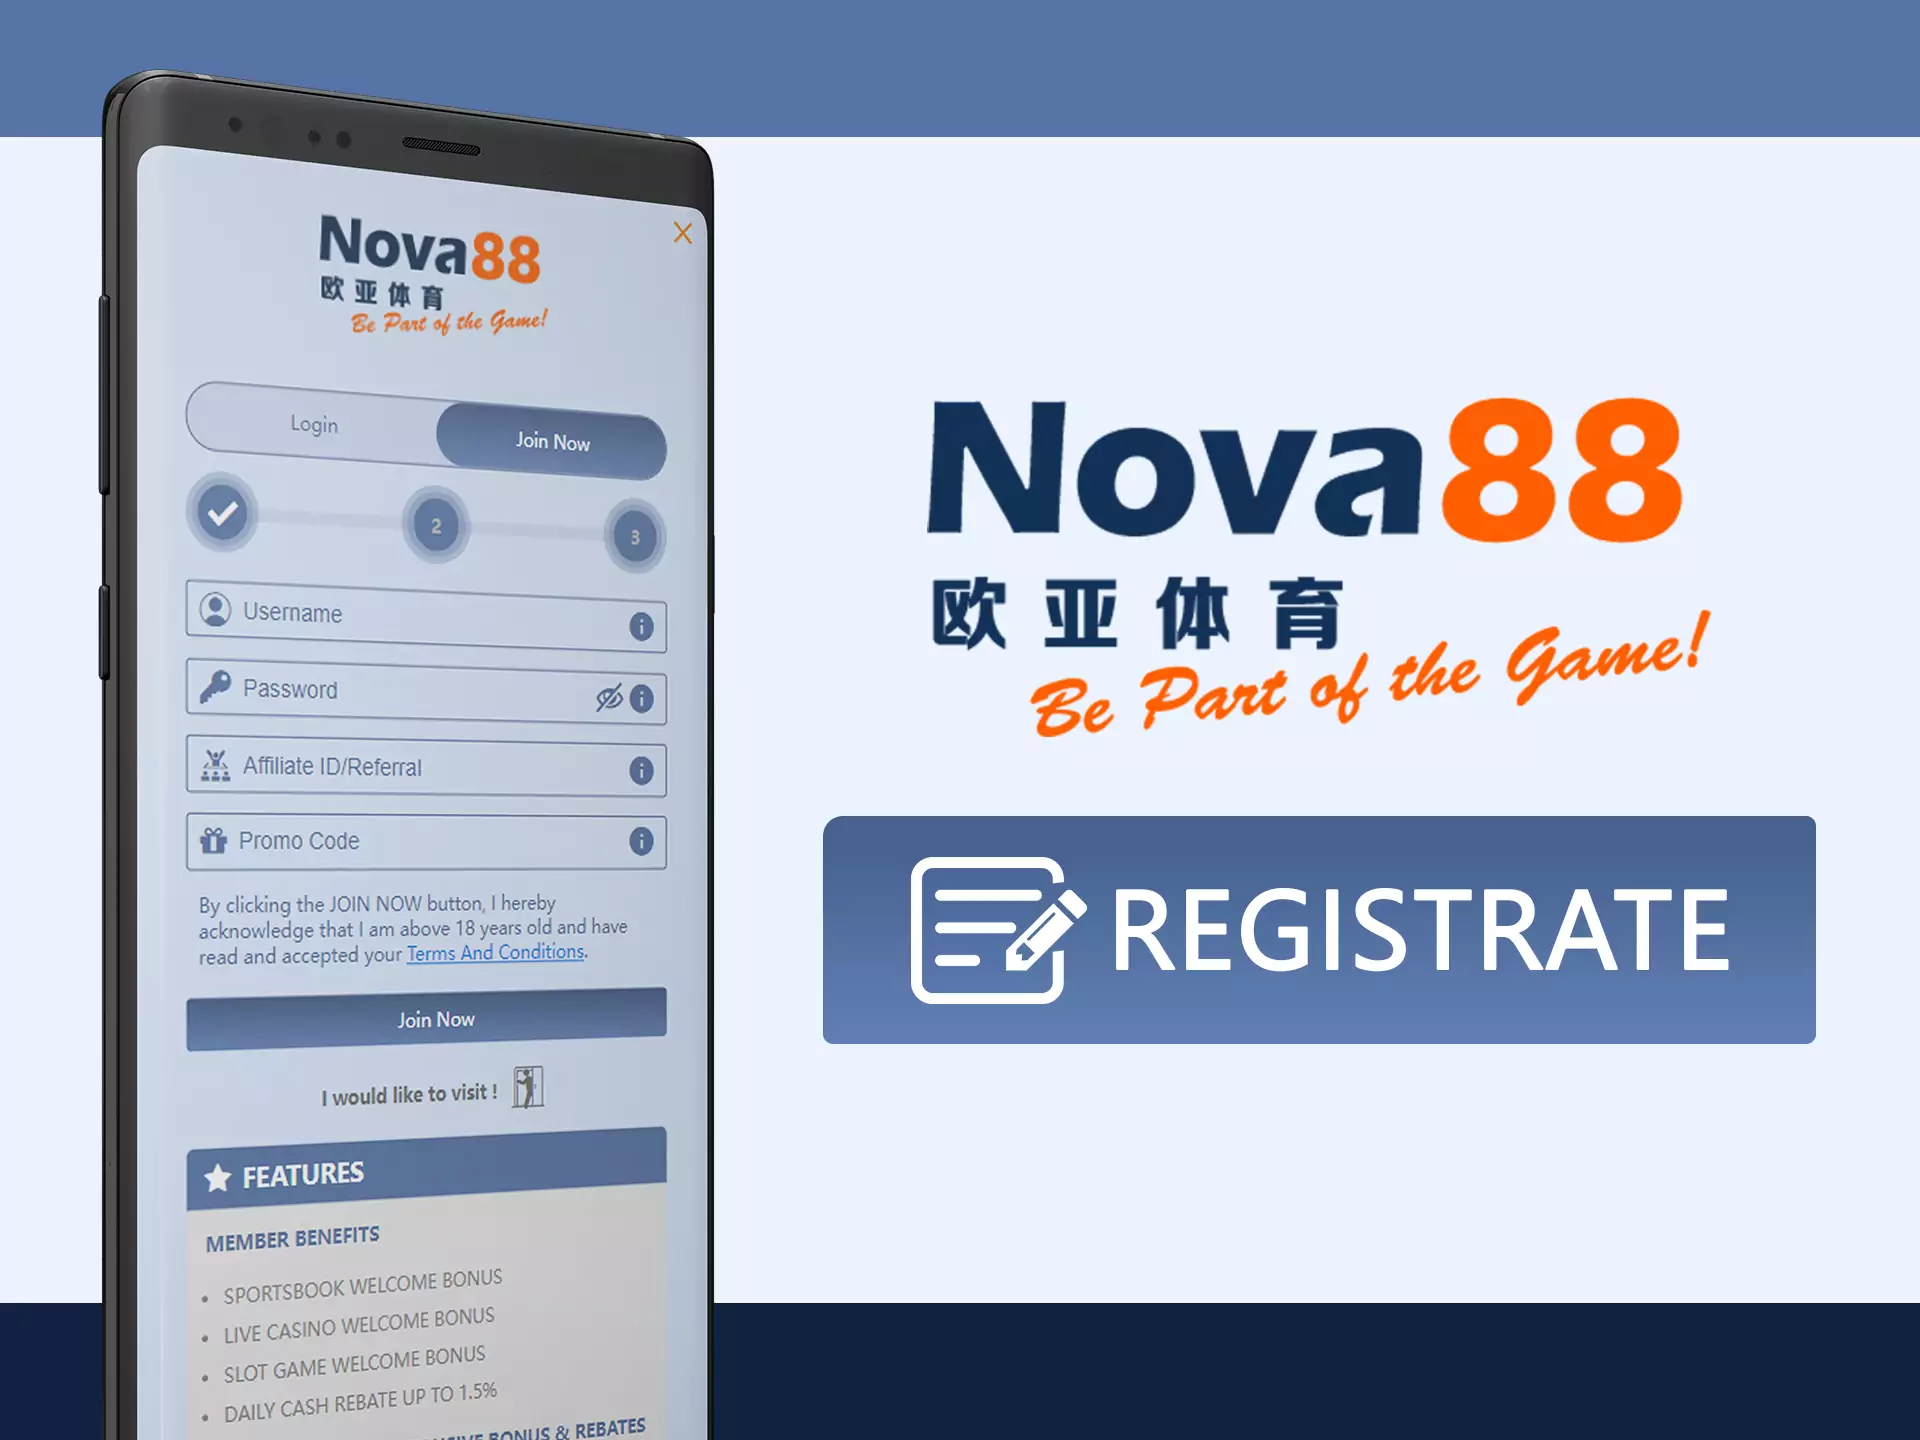 Registering with Nova88 app does not take much time.